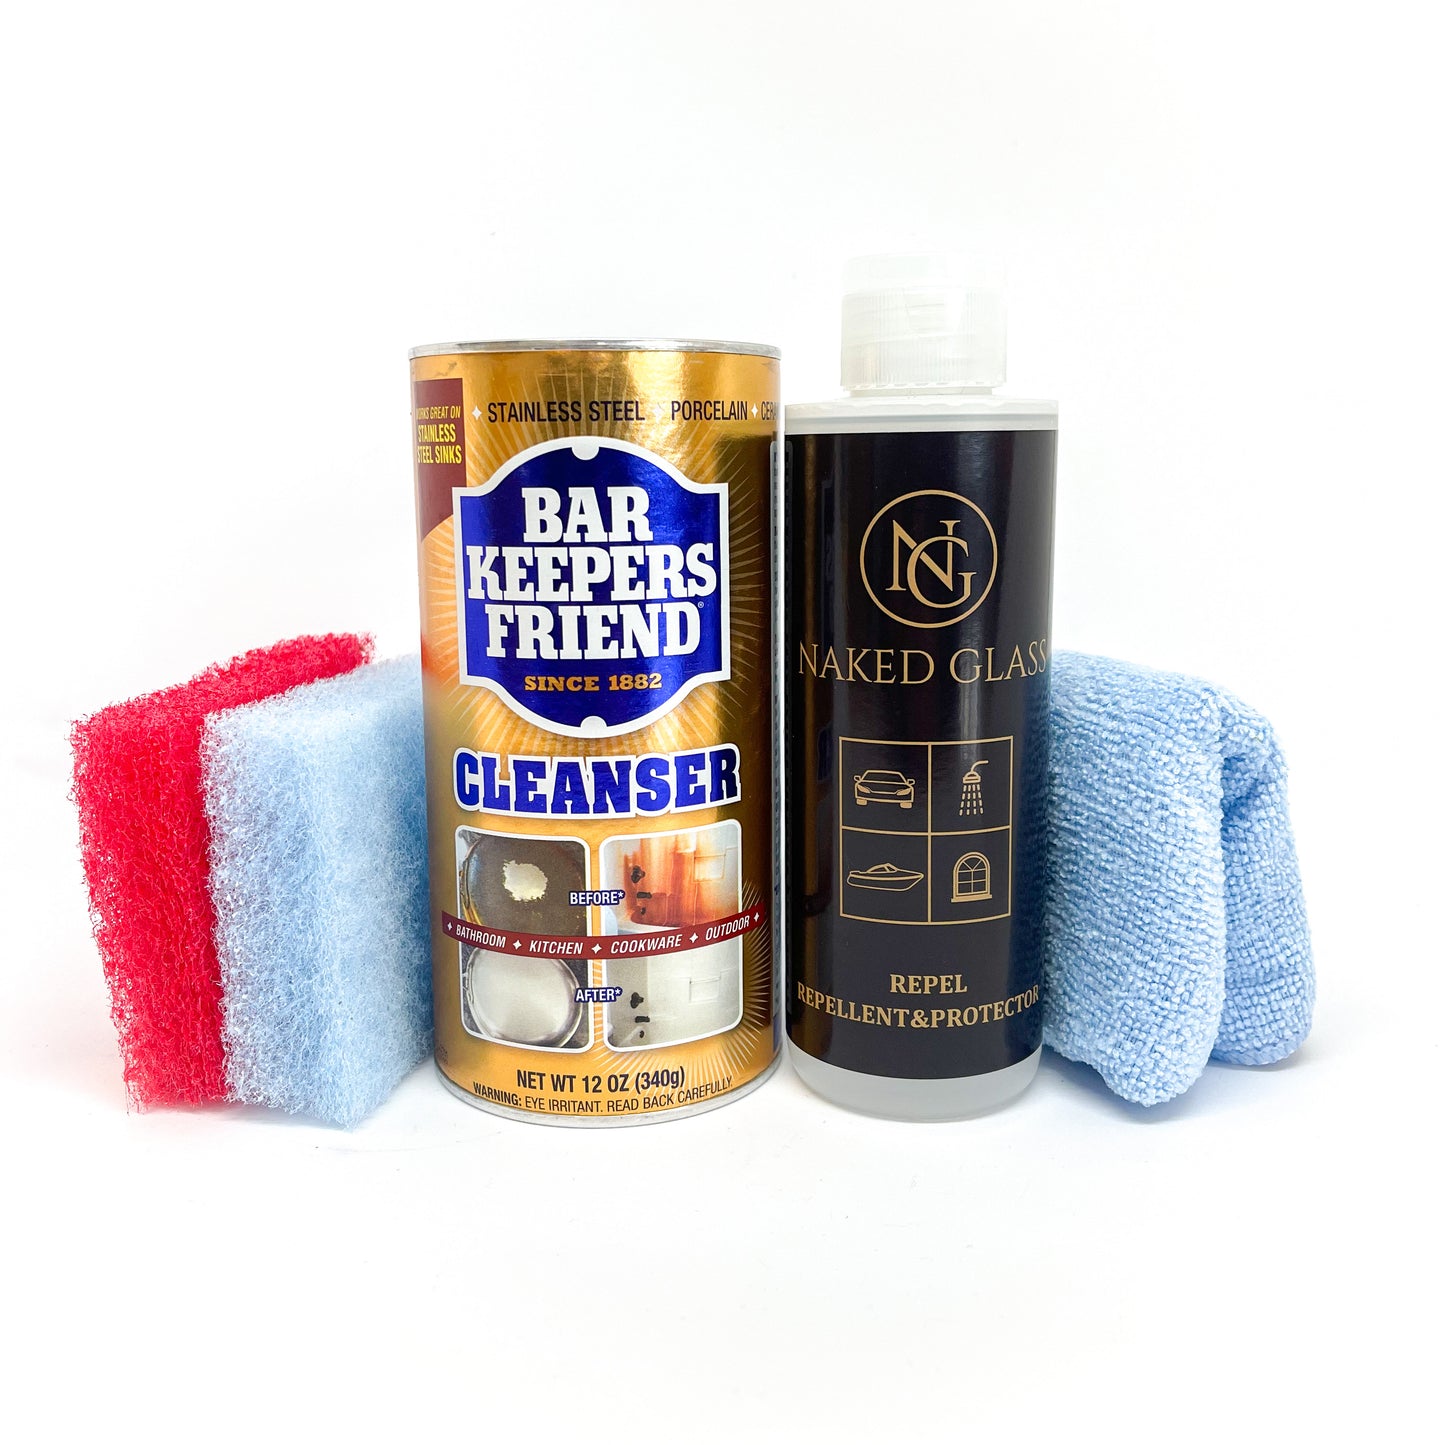 Shower Cleaning & Protection Kit